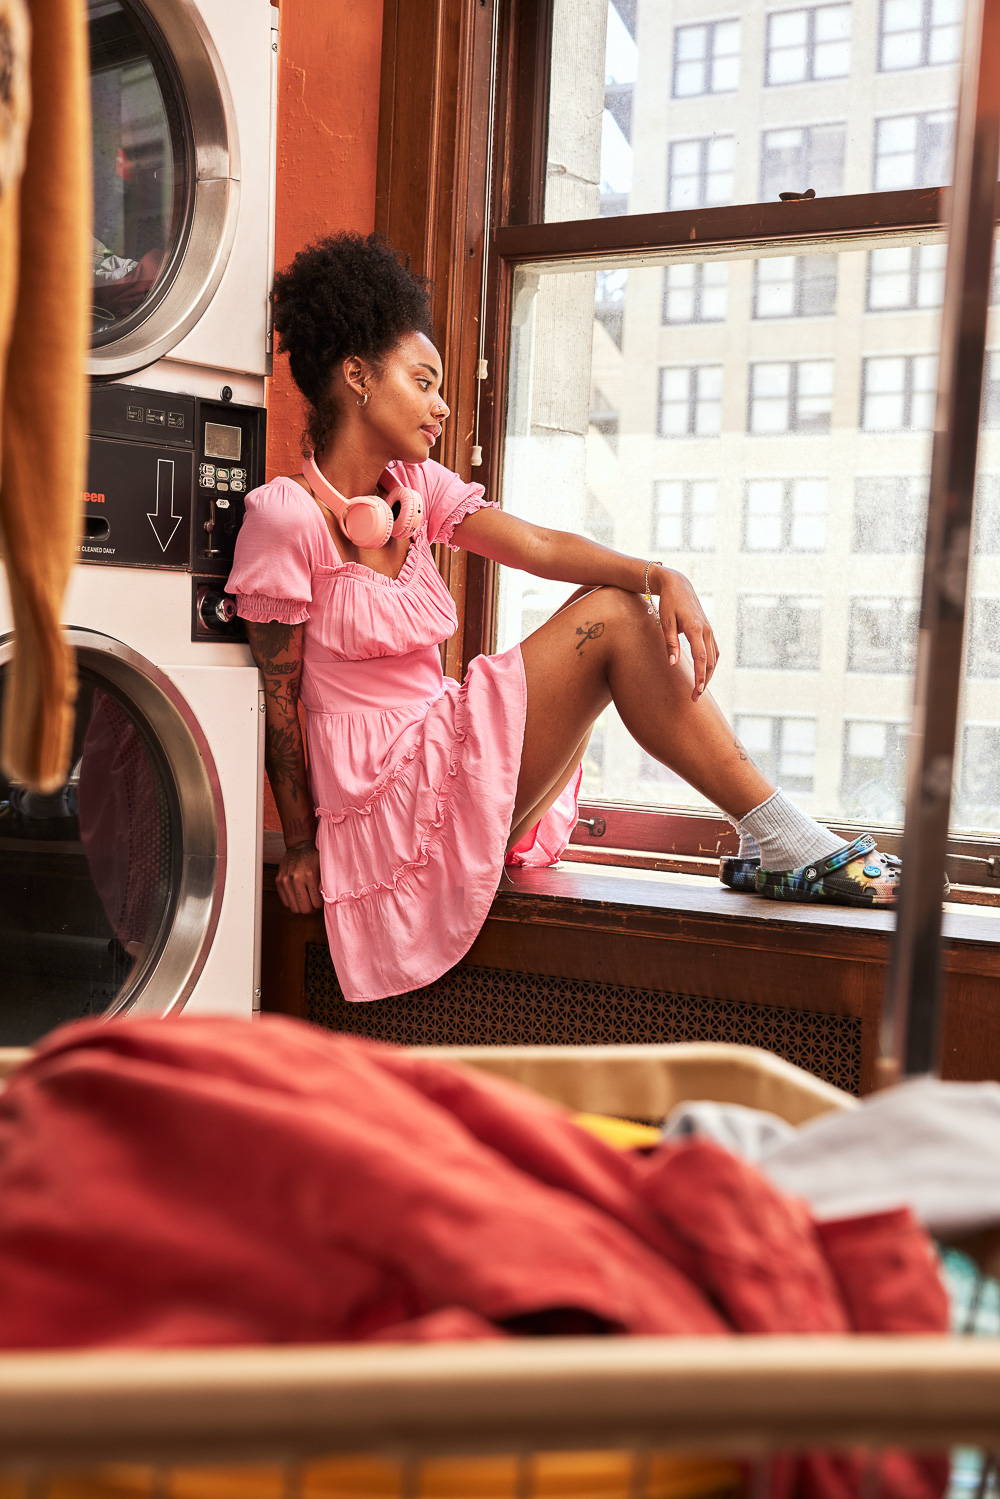 Trixxi Back to school embracing dorm life doing laundry and reading in a barbie pink tier dress.